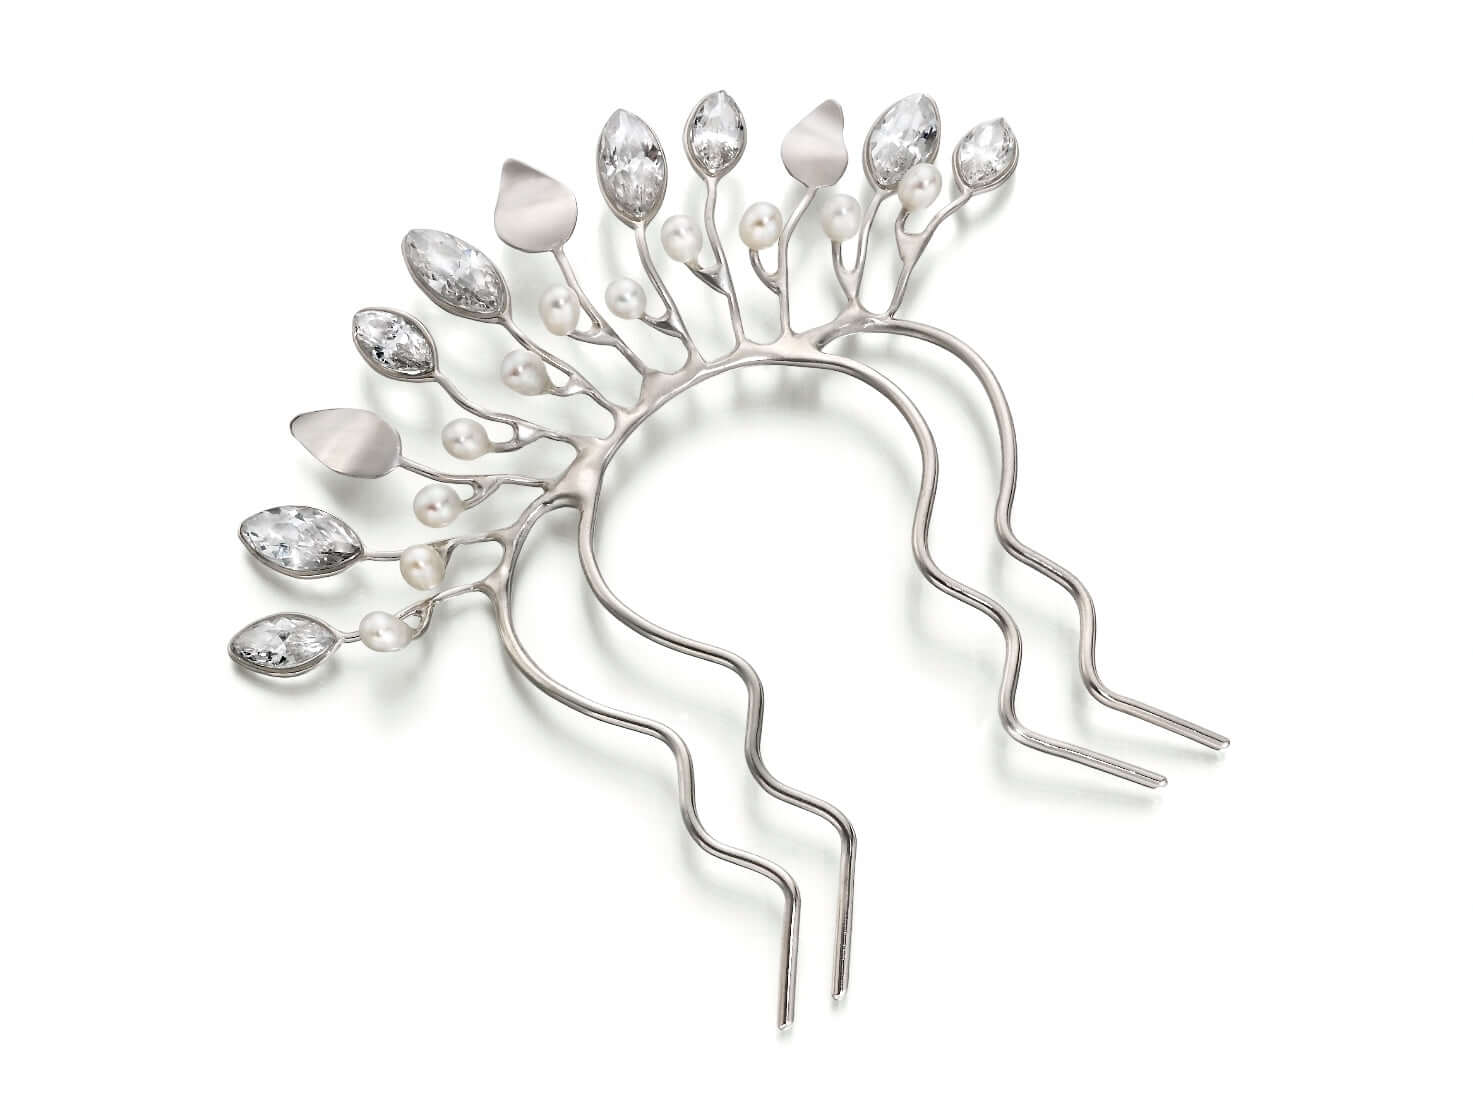 A handmade sterling silver leaf hair comb with cubic zirconia and freshwater pearls.